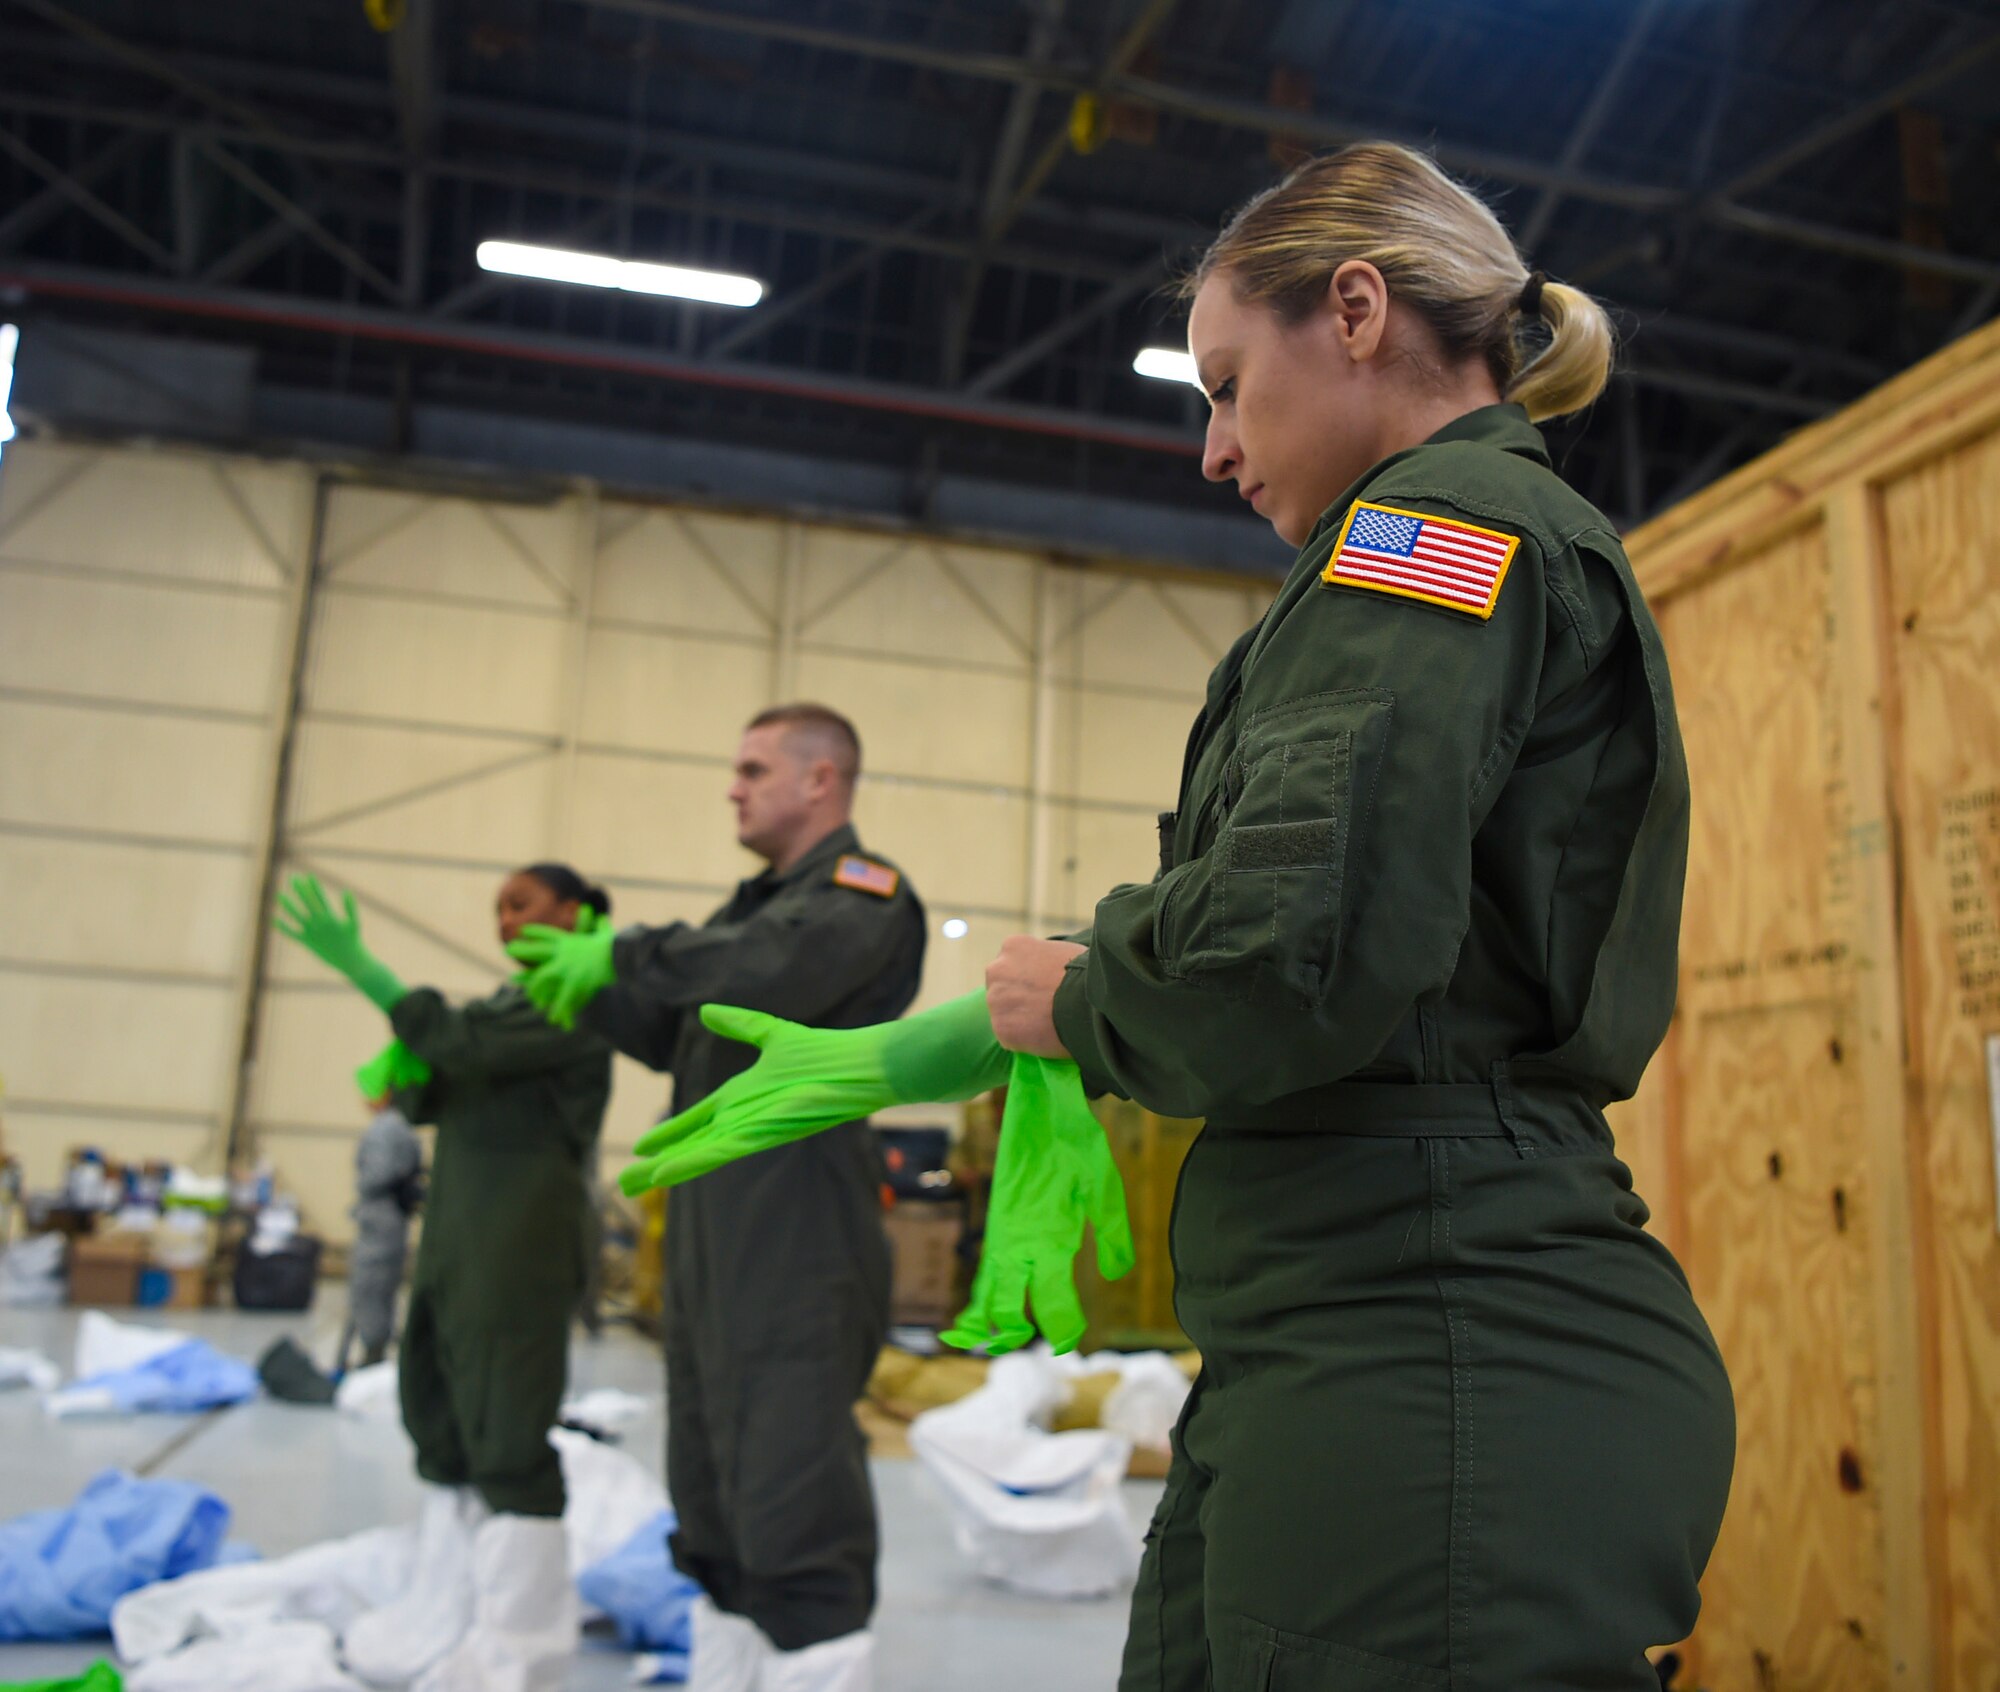 U.S. Air Force Staff Sgt. Laura Mendoza dons her personal protection equipment March 5, 2019, during transportation isolation system training at Joint Base Charleston, S.C. Mendoza is a respiratory therapist from the 60th Surgical Operations Squadron at Travis Air Force Base, Calif. Engineered and implemented after the Ebola virus outbreak in 2014, the TIS is an enclosure the Department of Defense can use to safely transport patients with highly contagious diseases. (U.S. Air Force photo by Senior Airman Cody R. Miller)